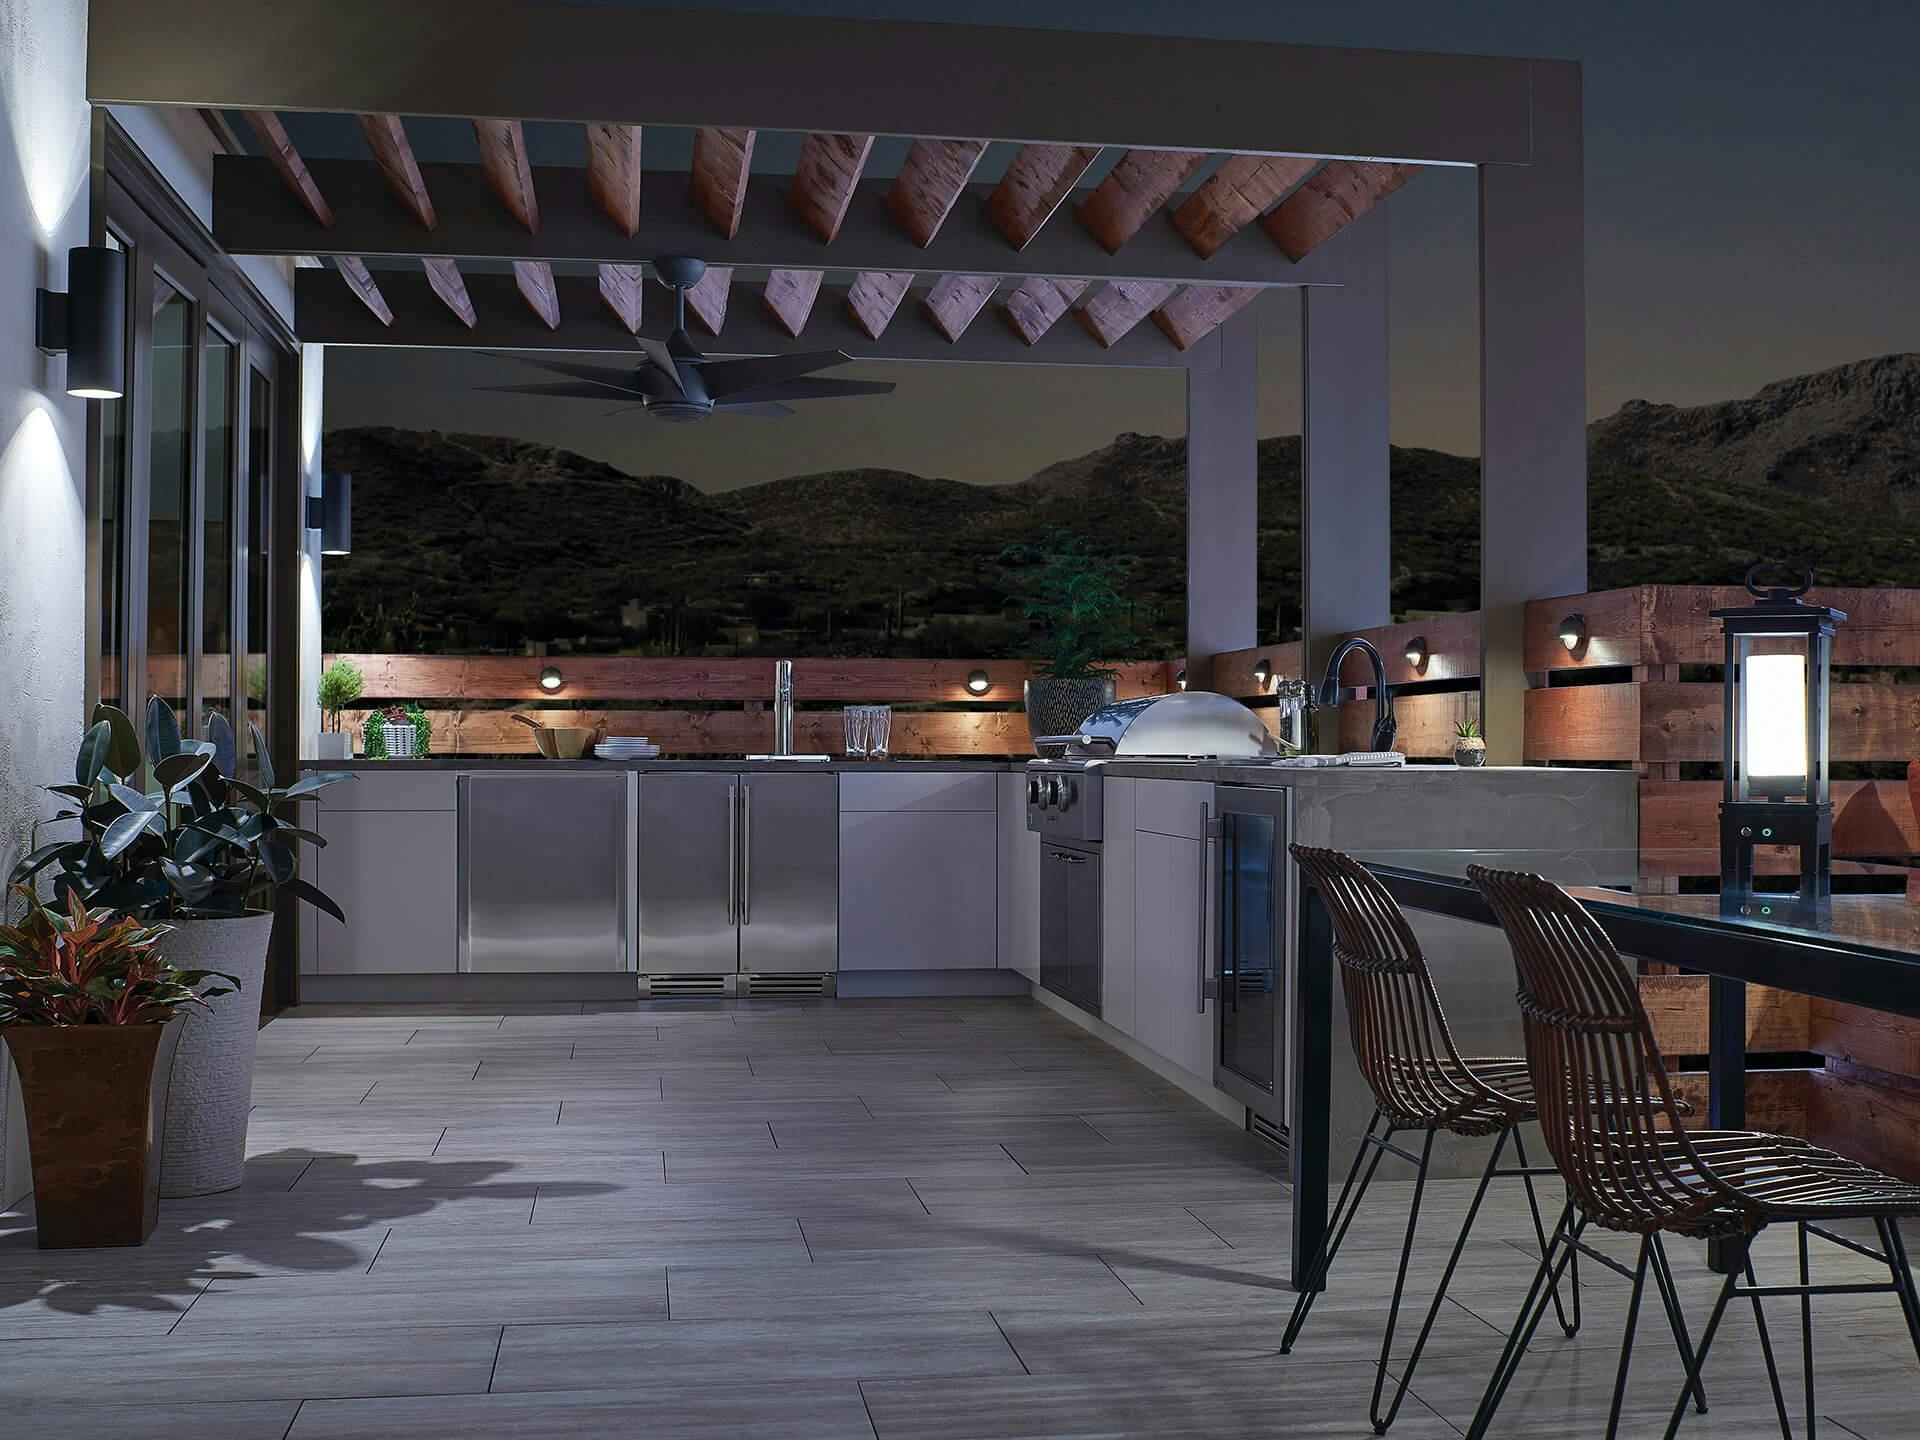 An outdoor kitchen at night surrounded by several lighting fixtures in centennial brass and a Lehr II ceiling fan hung in the center